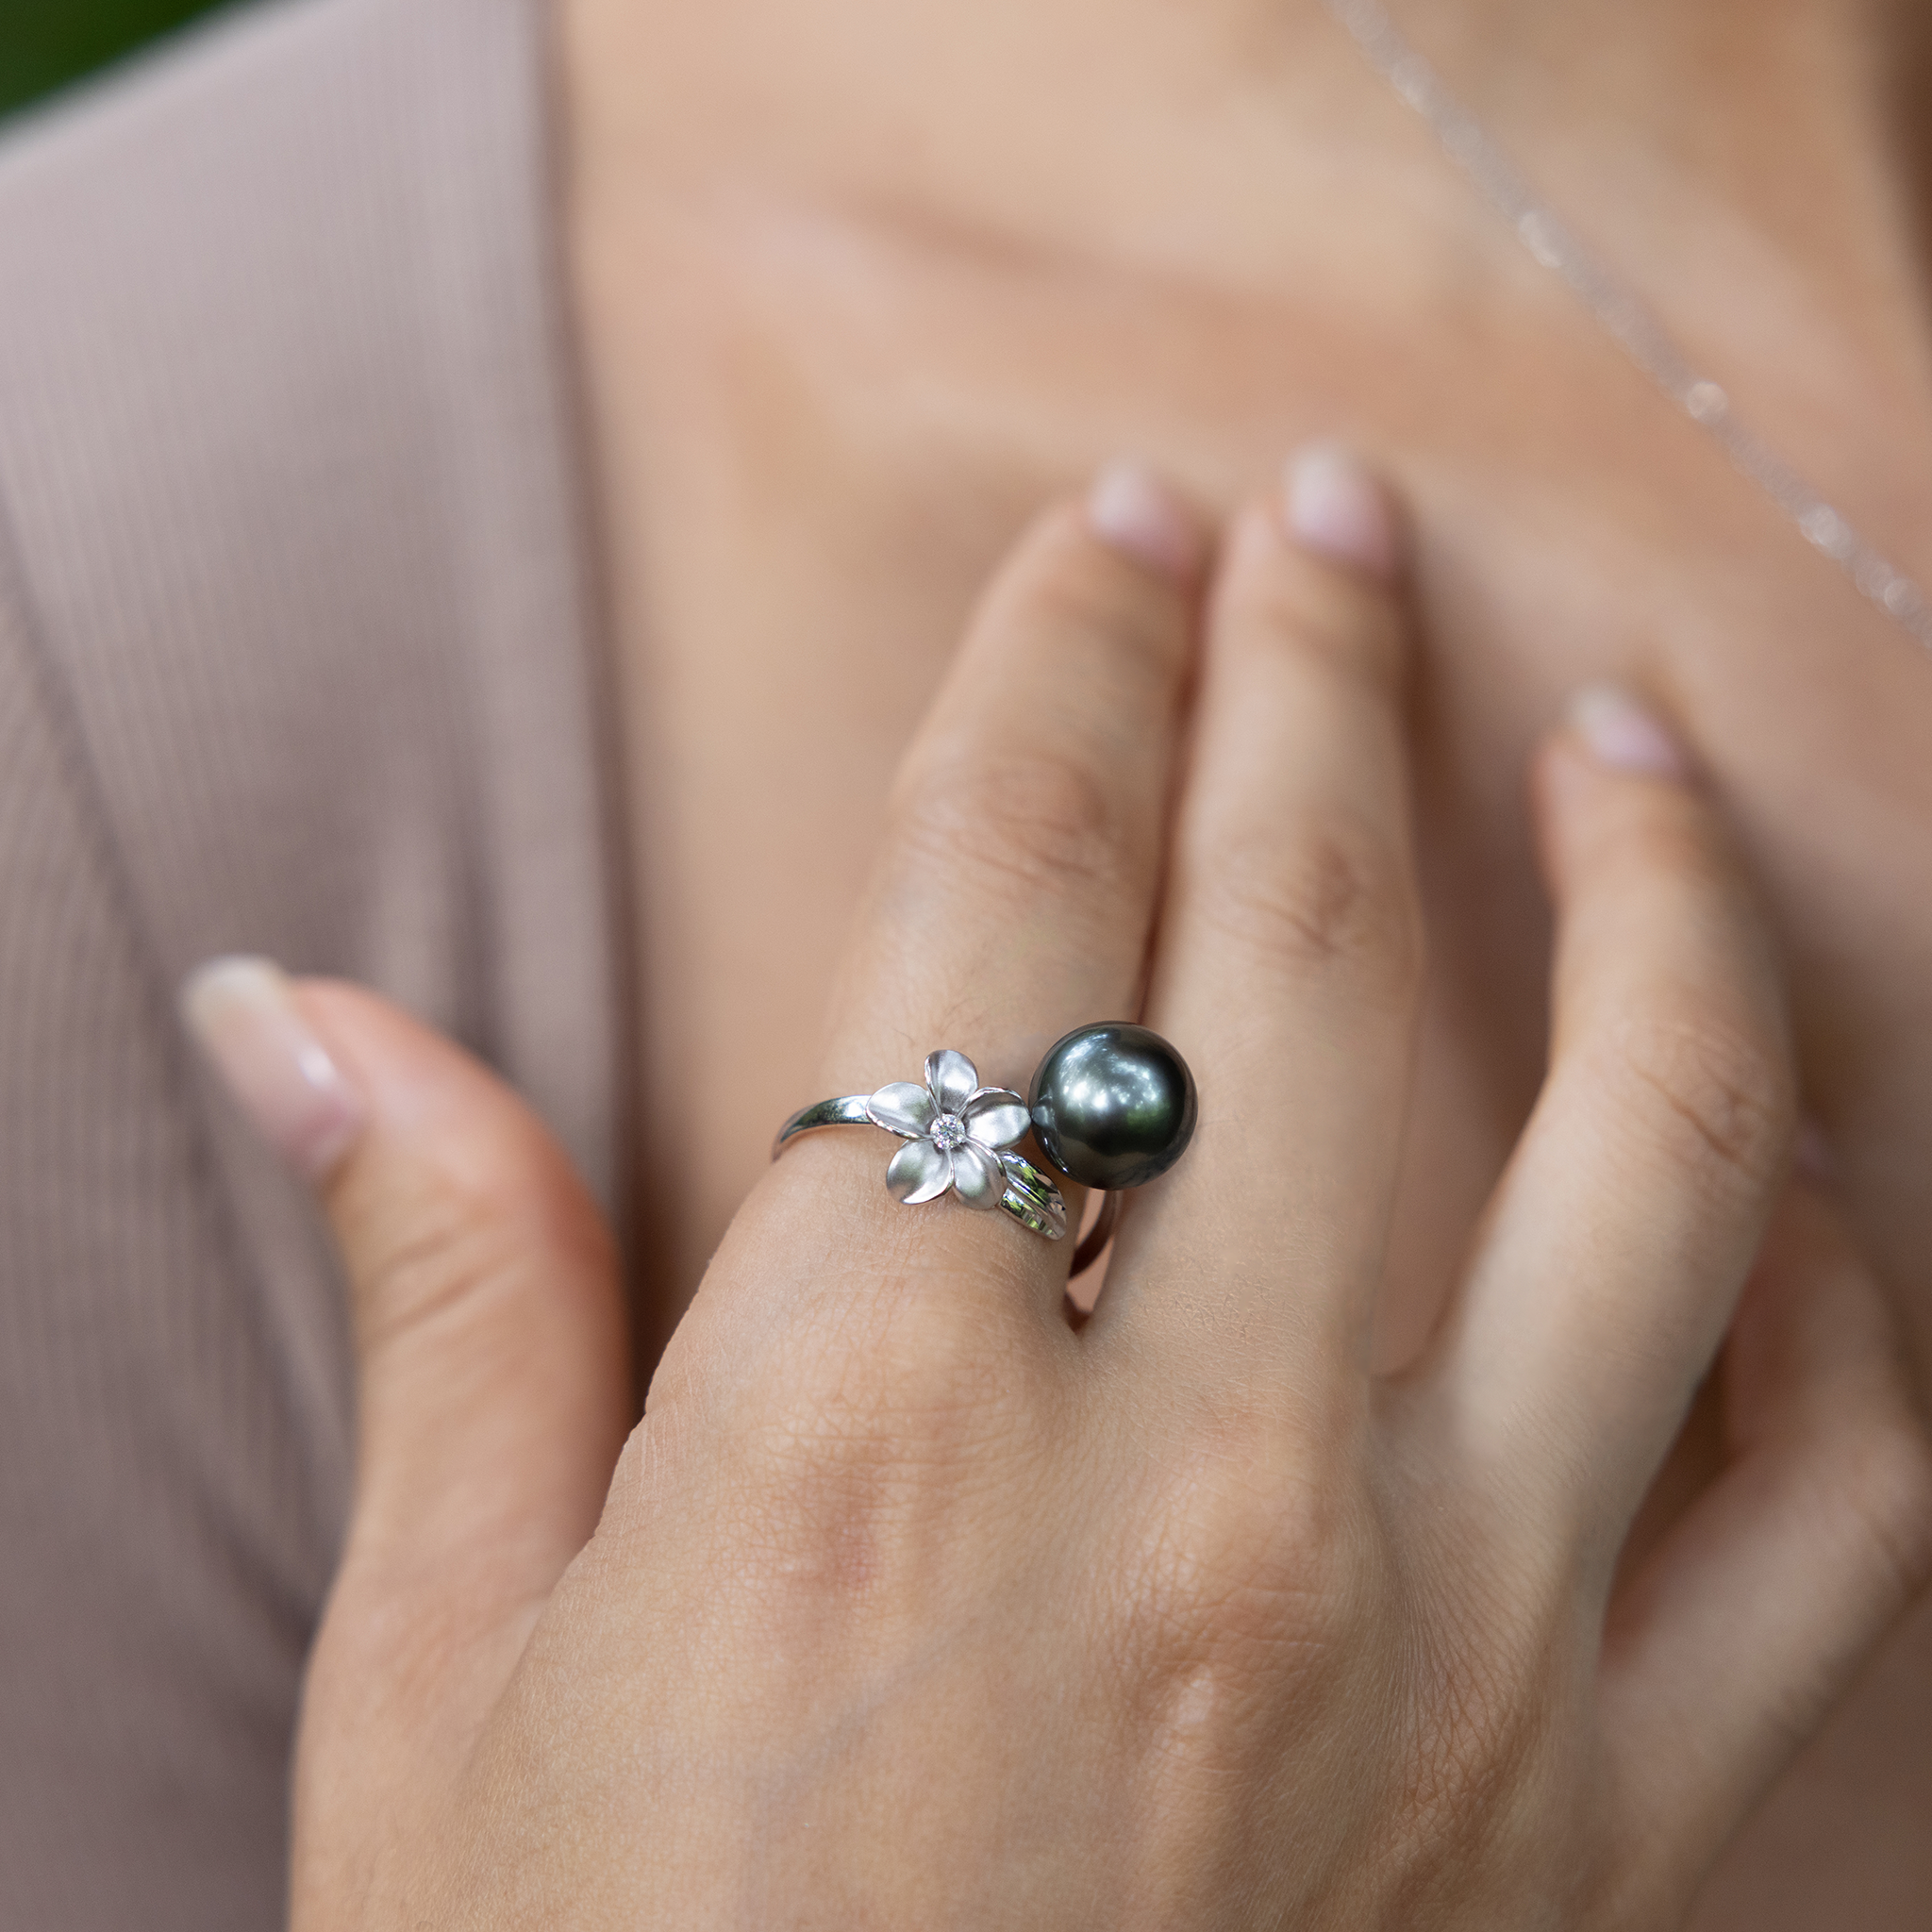 Plumeria Tahitian Black Pearl Ring in White Gold with Diamond - 10-11mm